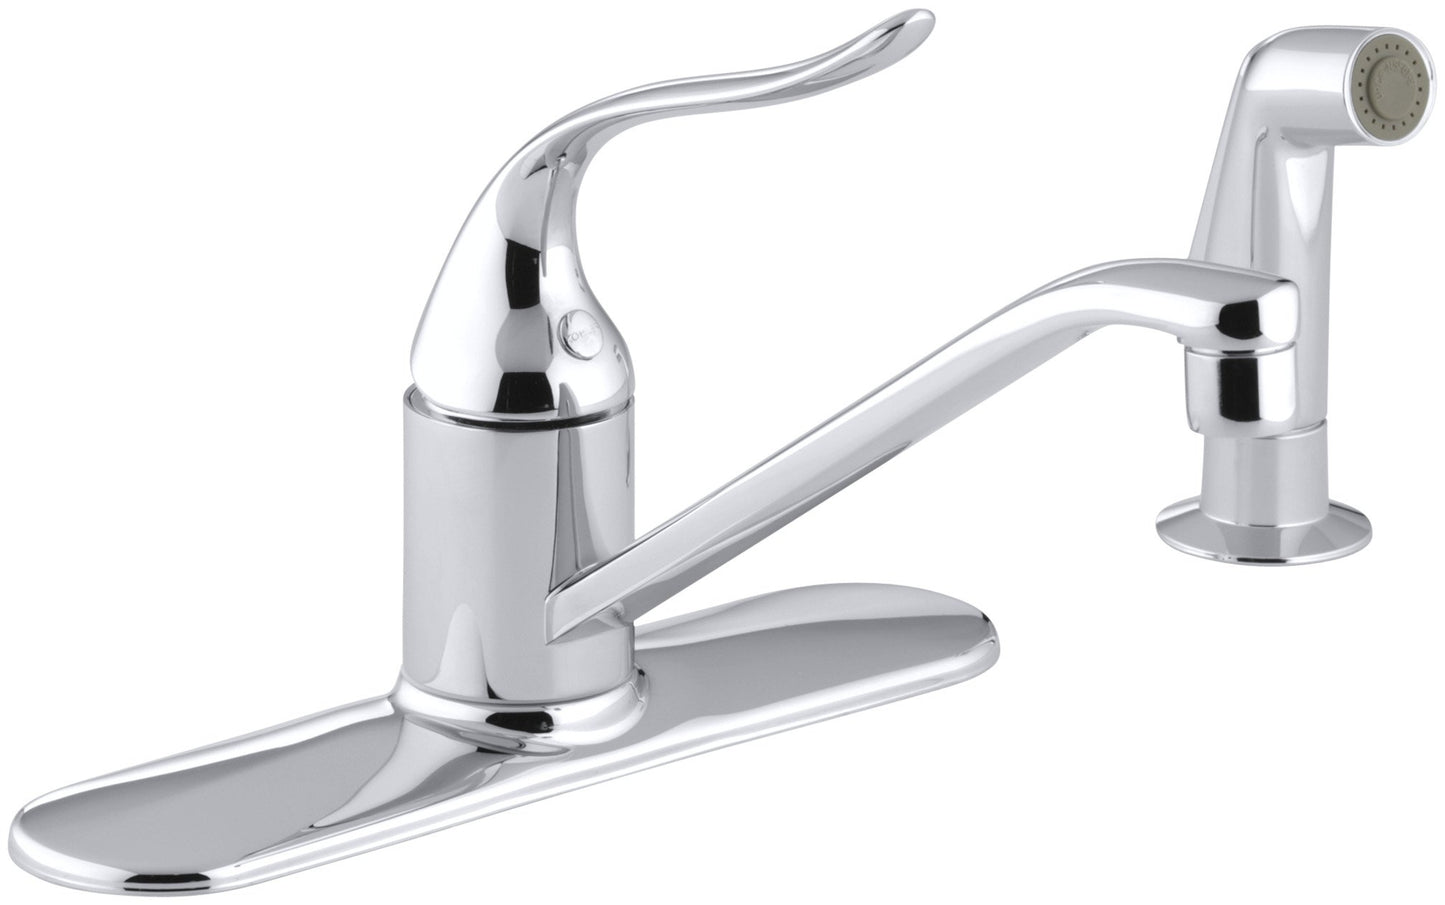 KOHLER 15172-F-CP Coralais(R) Three-Hole Sink 8-1/2" spout, Matching Finish sidespray and Lever Handle Kitchen Faucet, Polished Chrome - Like New